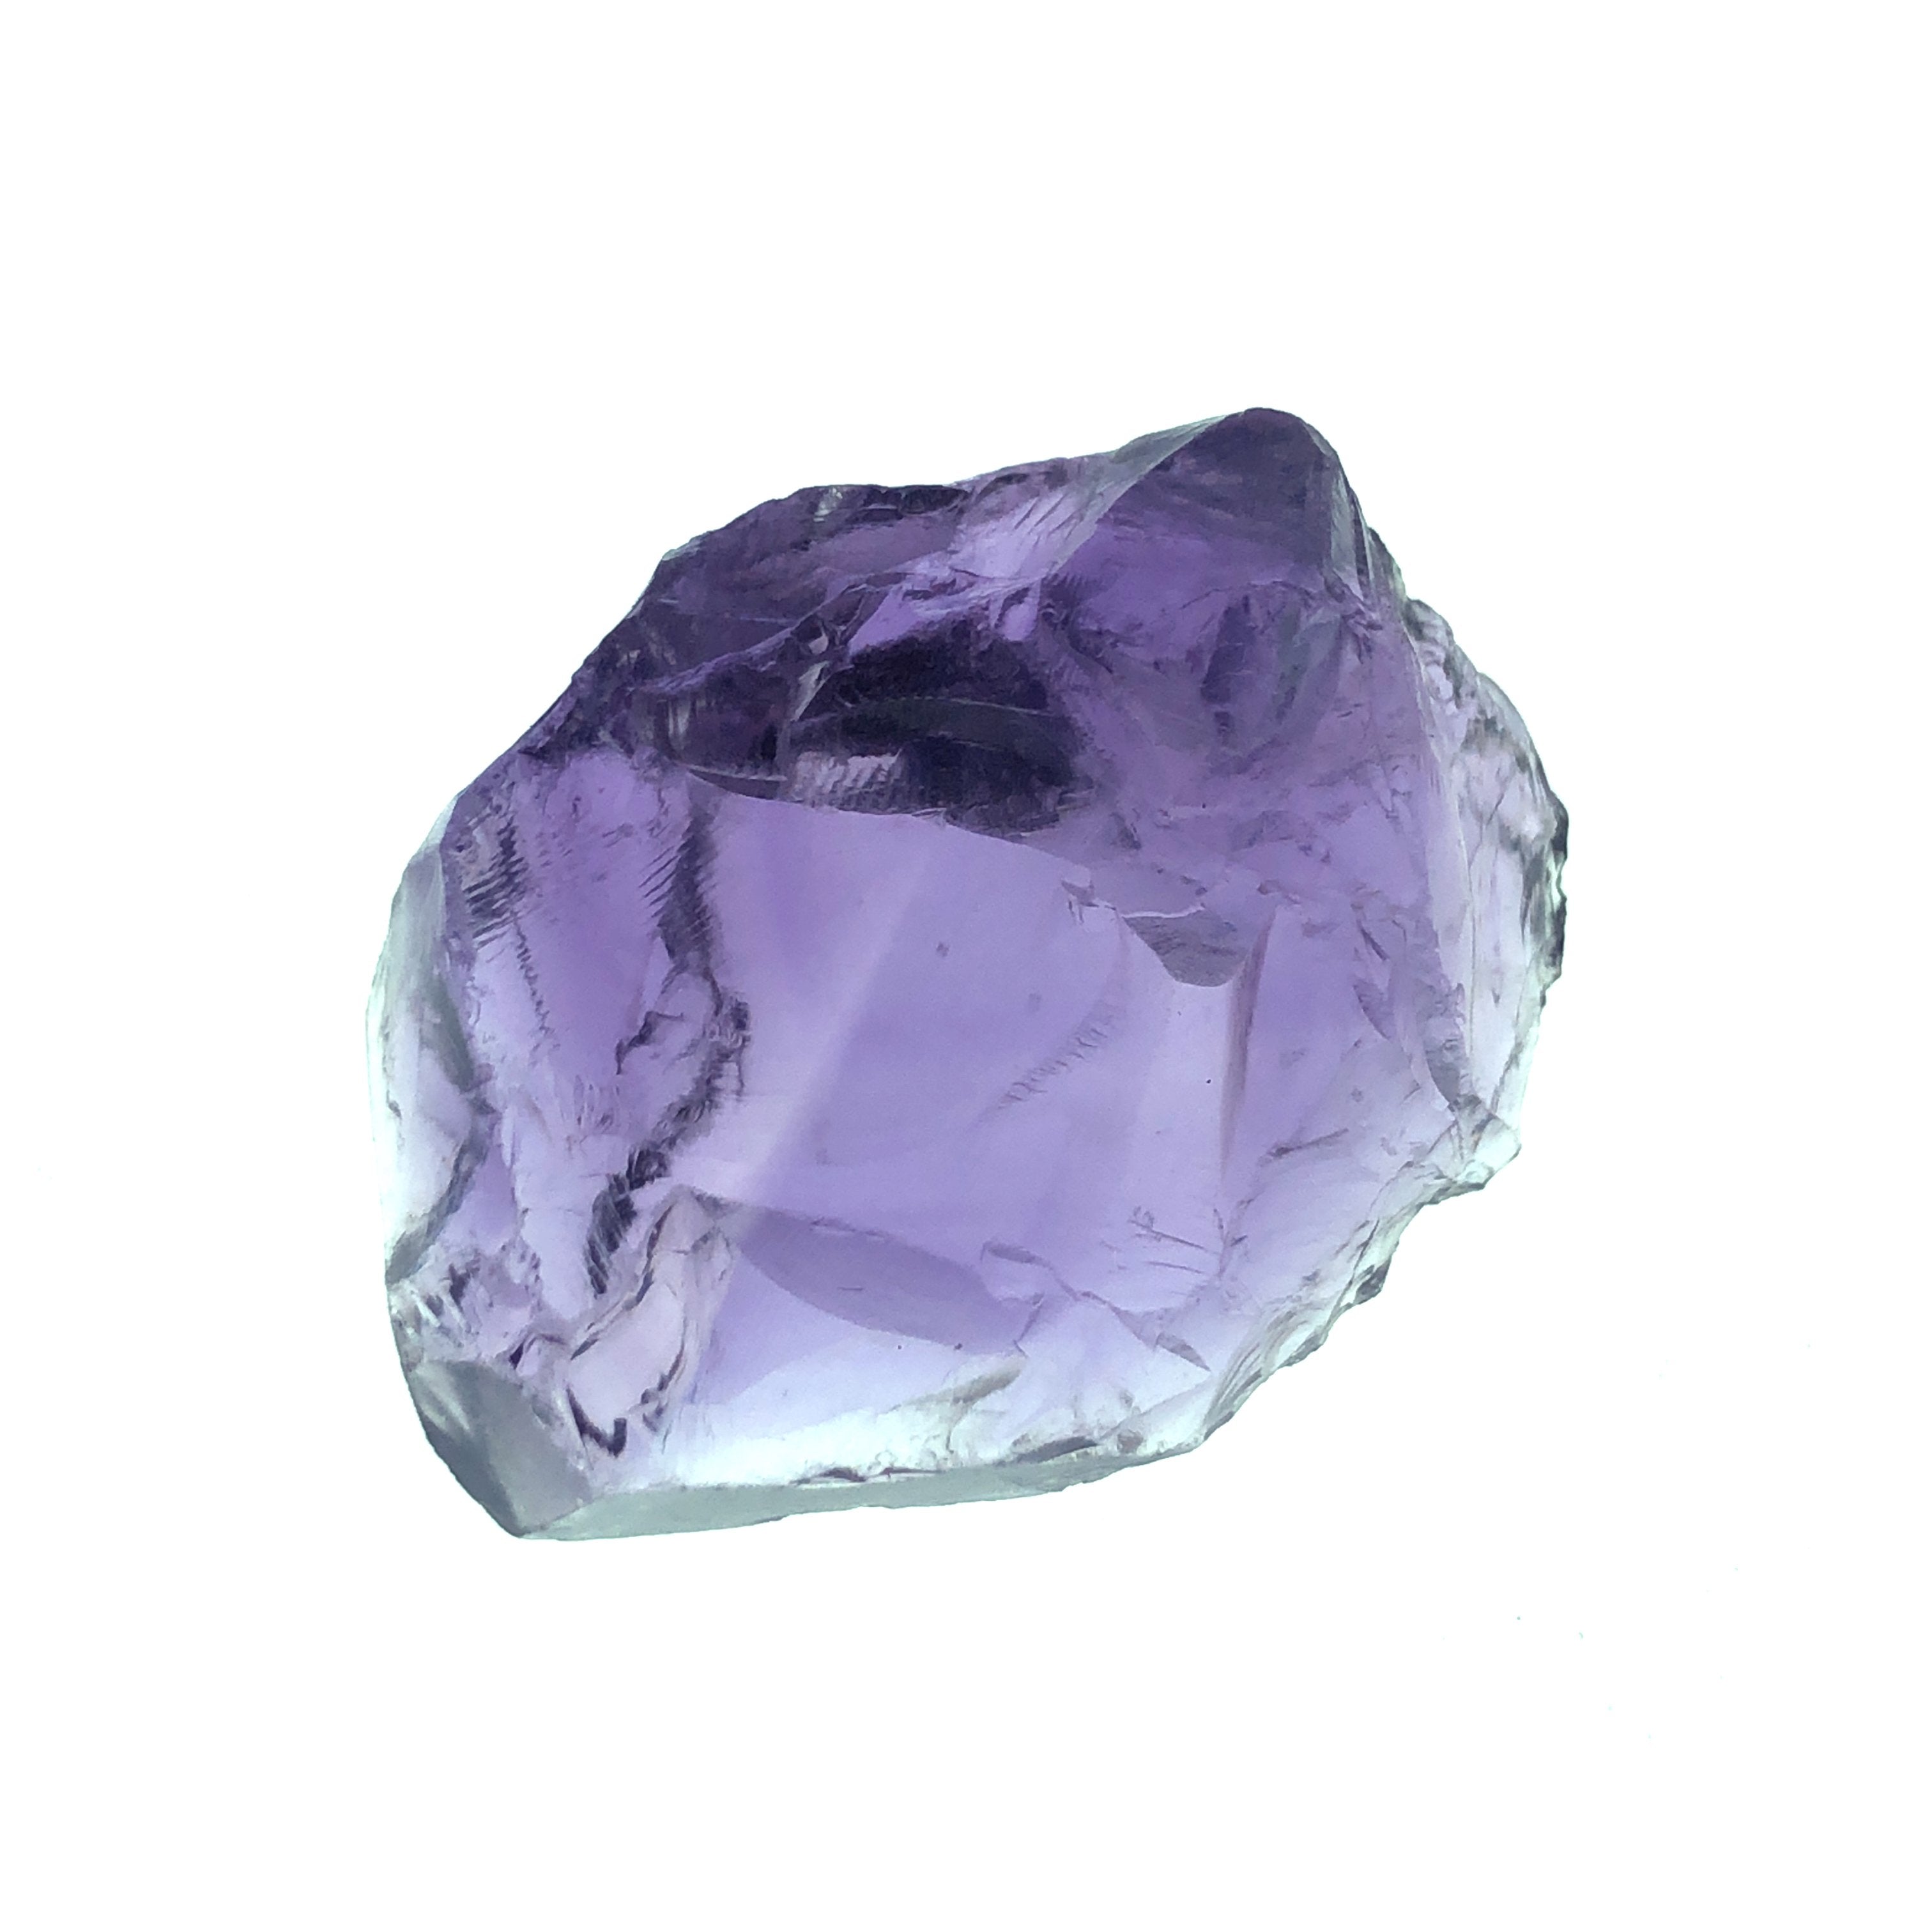 Rough Amethyst from Brazil - 48.4 CTW